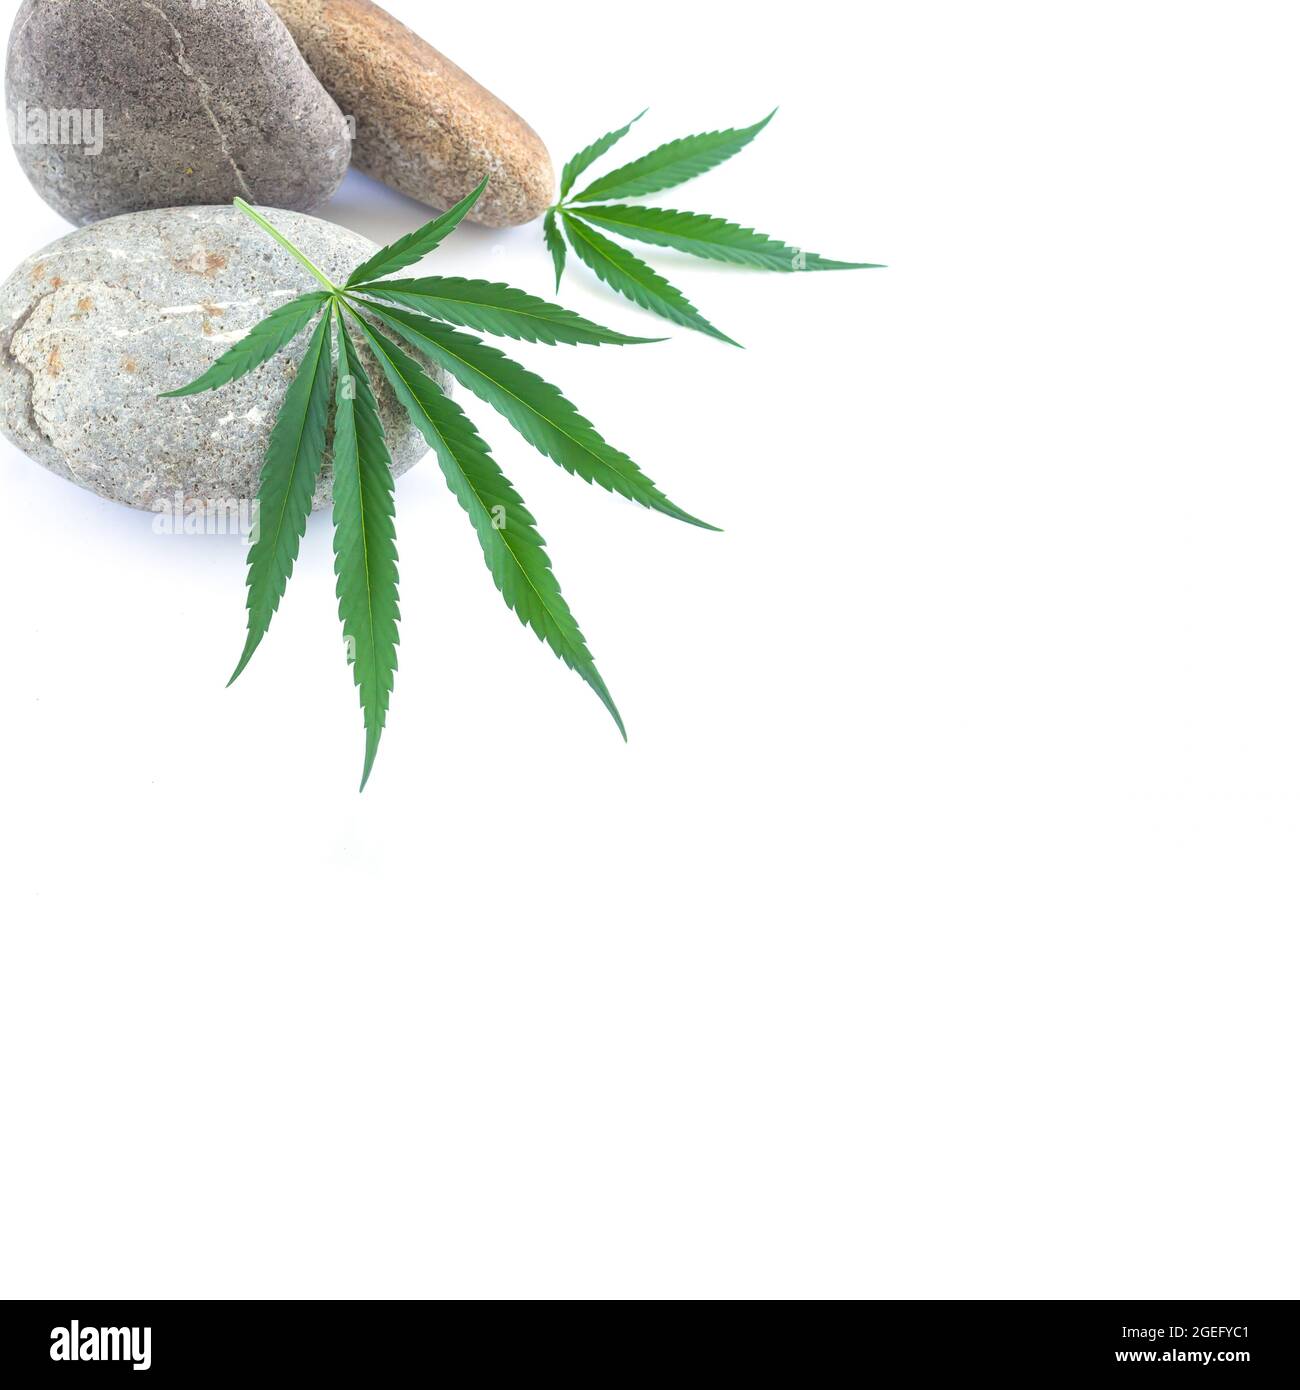 Cannabis or hemp plant leaves with stones isolated on white background with copy space Stock Photo